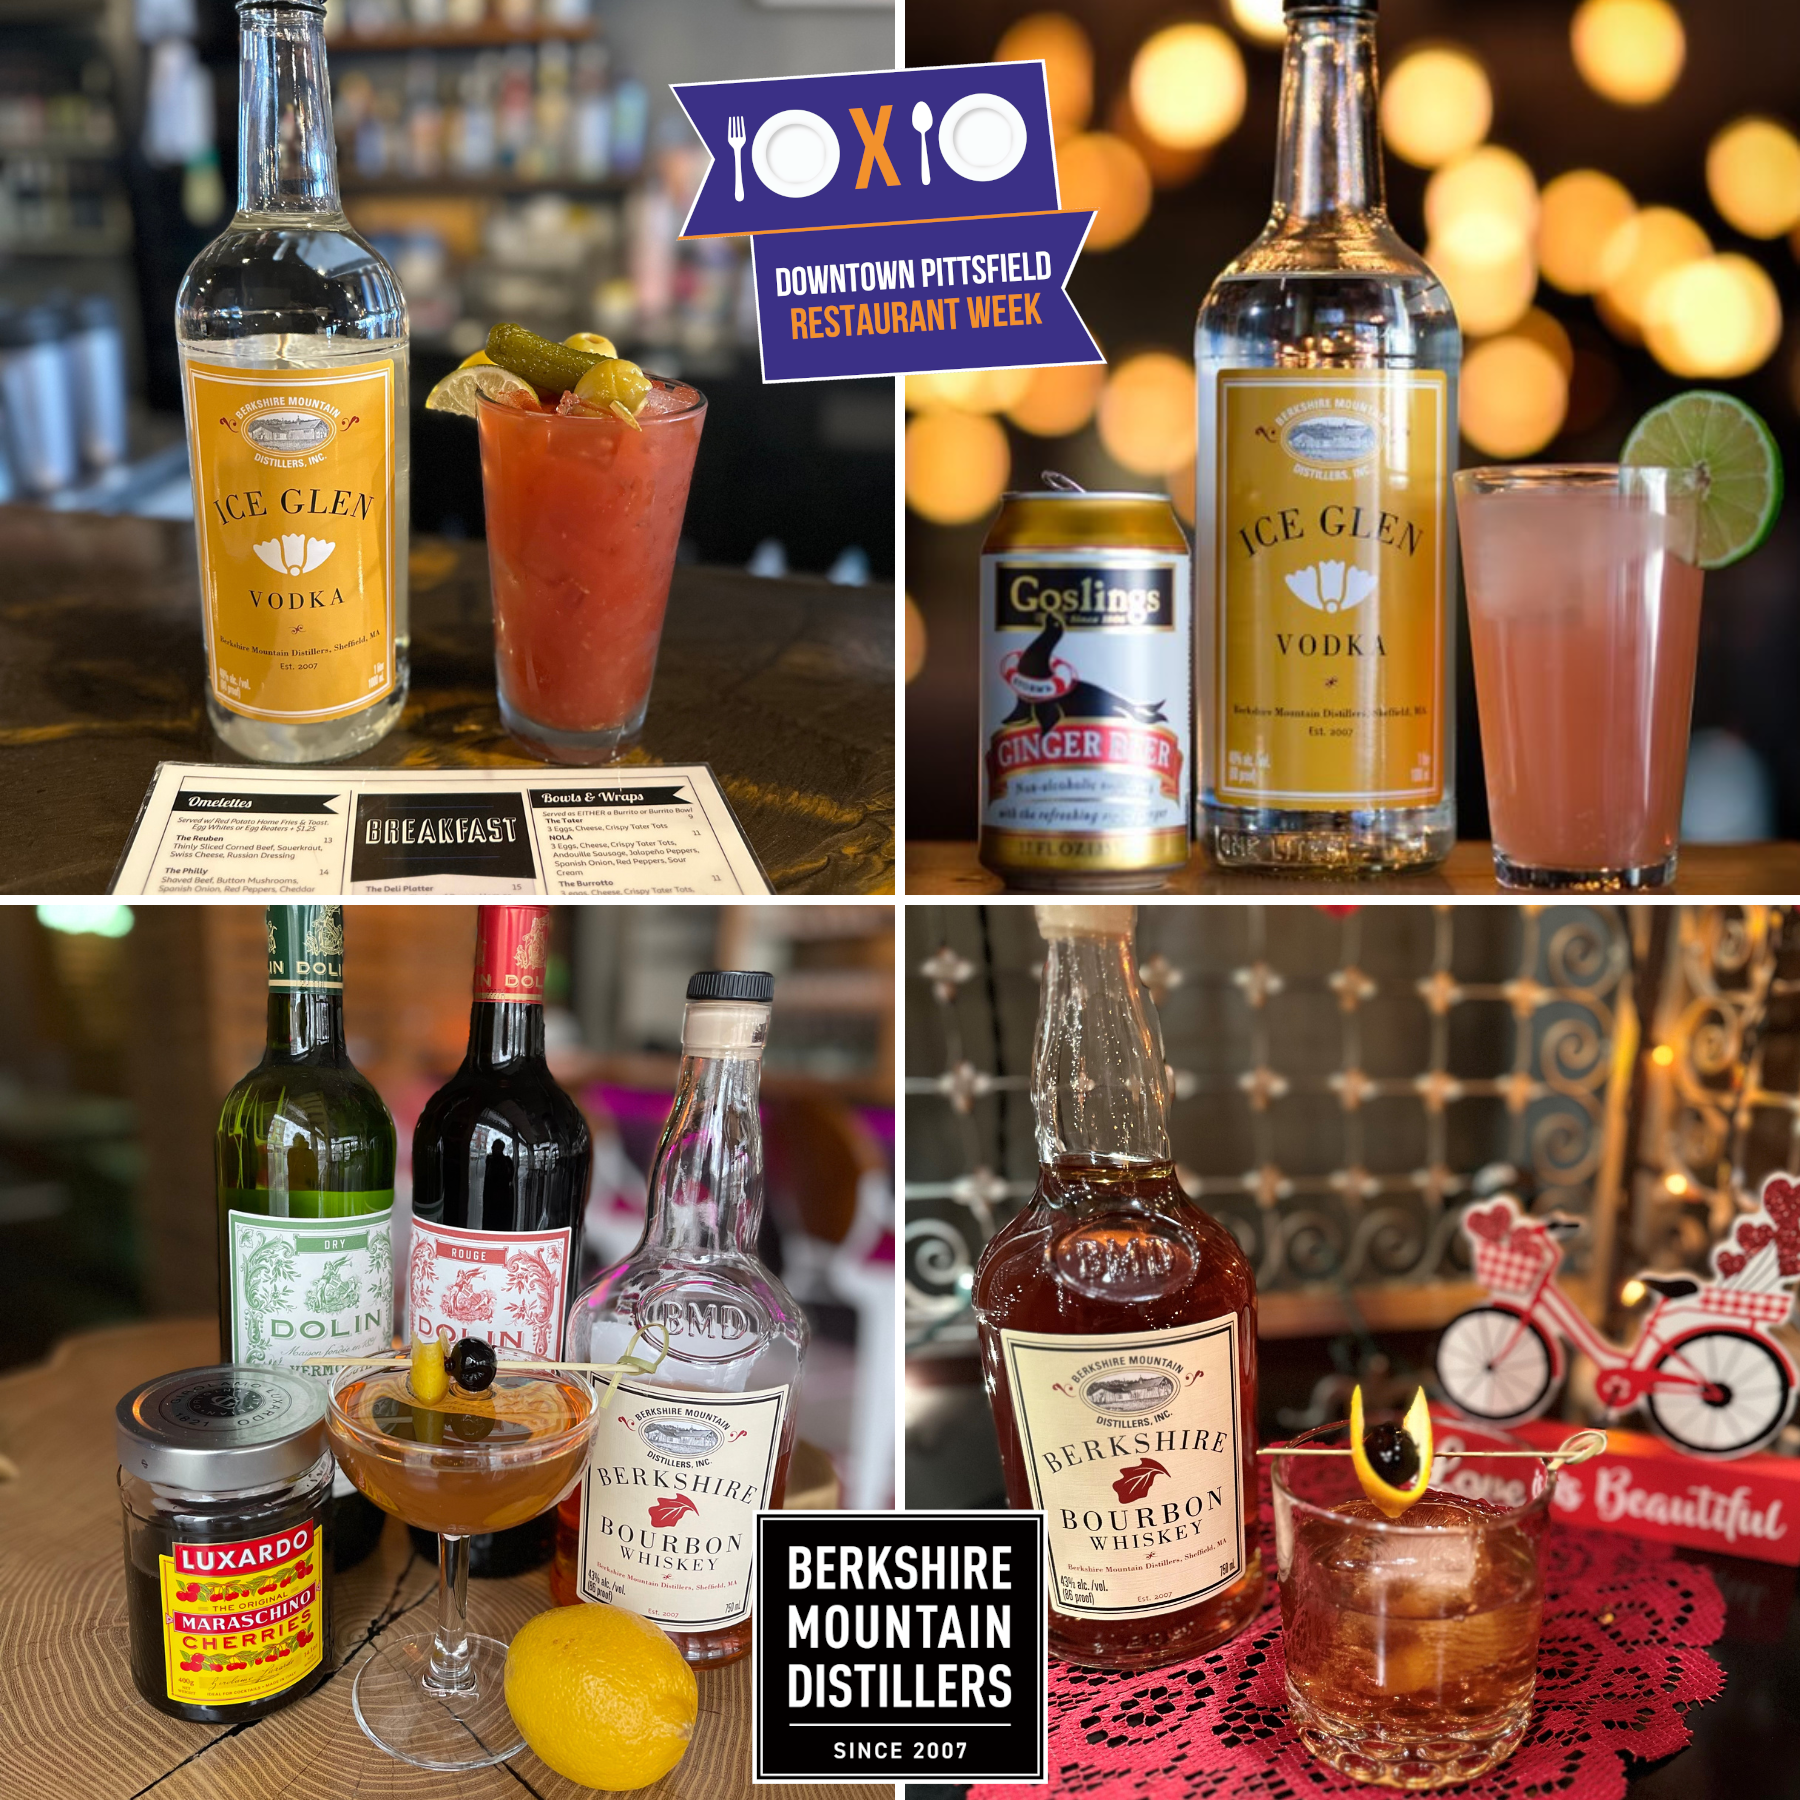 Berkshire Mountain Distillers’ “Perfect 10 Cocktails”